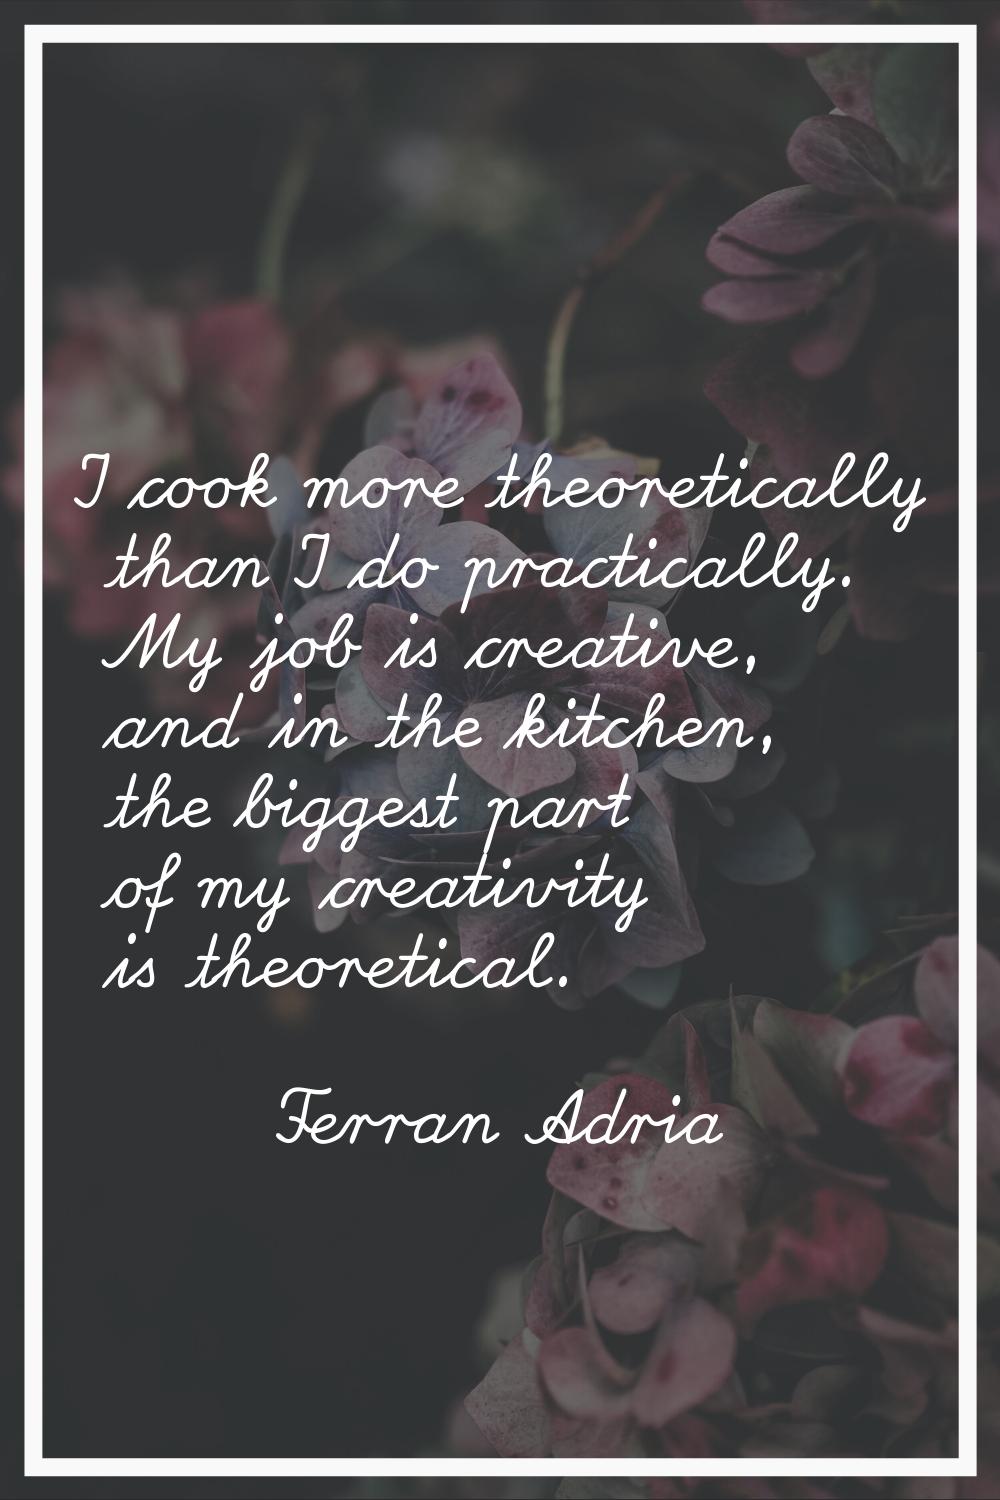 I cook more theoretically than I do practically. My job is creative, and in the kitchen, the bigges